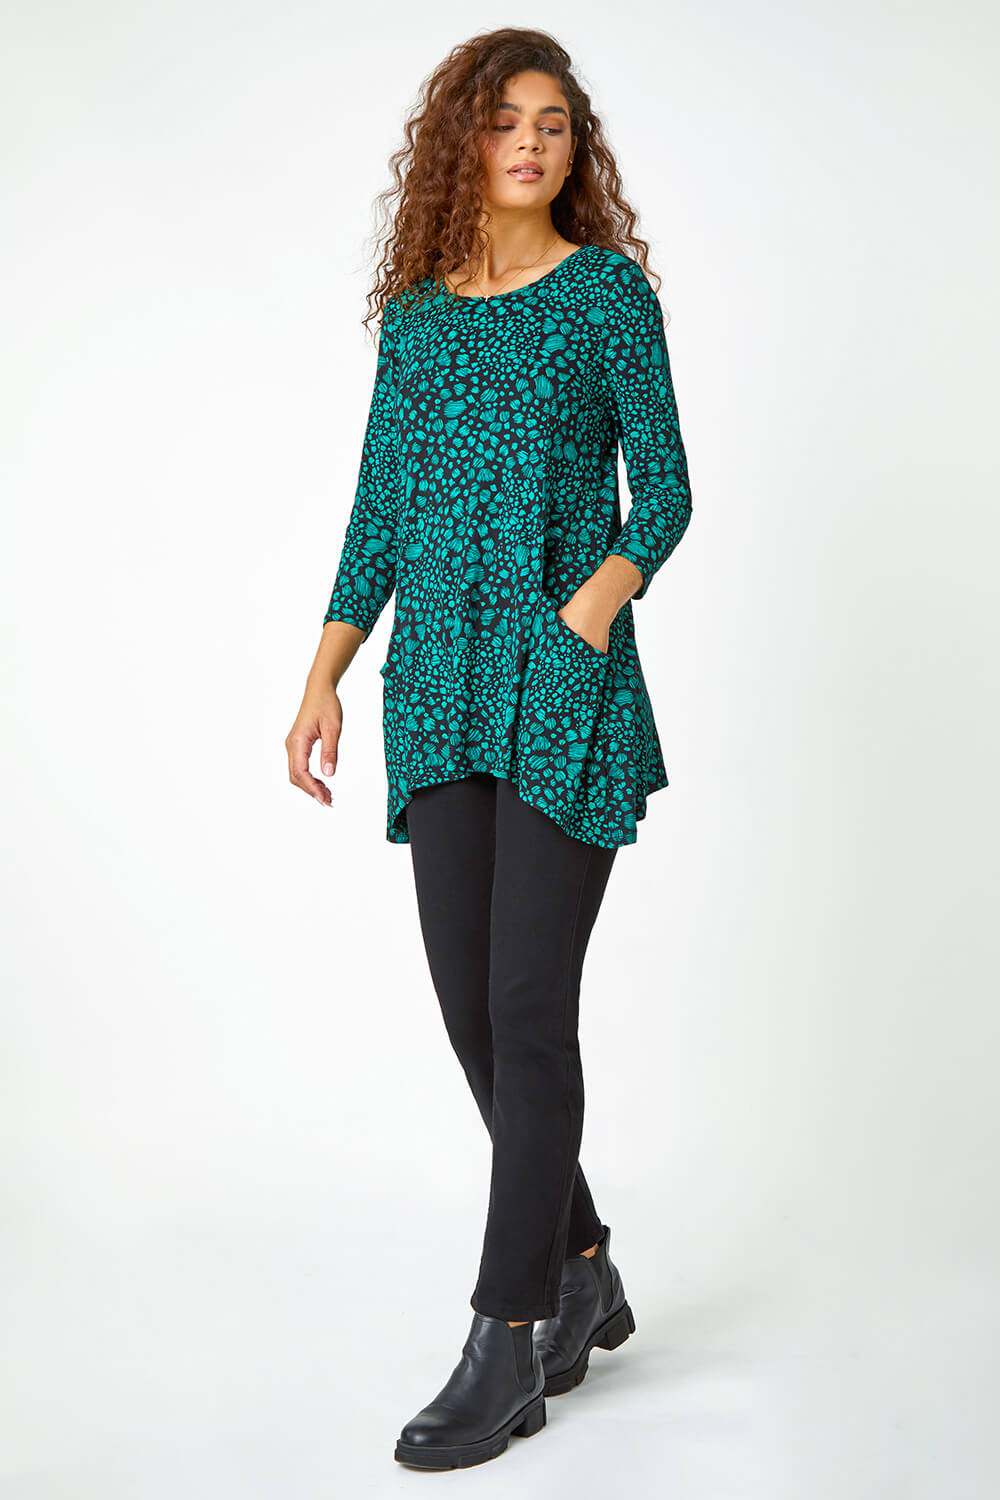 Green Spot Print Swing Stretch Top, Image 2 of 5